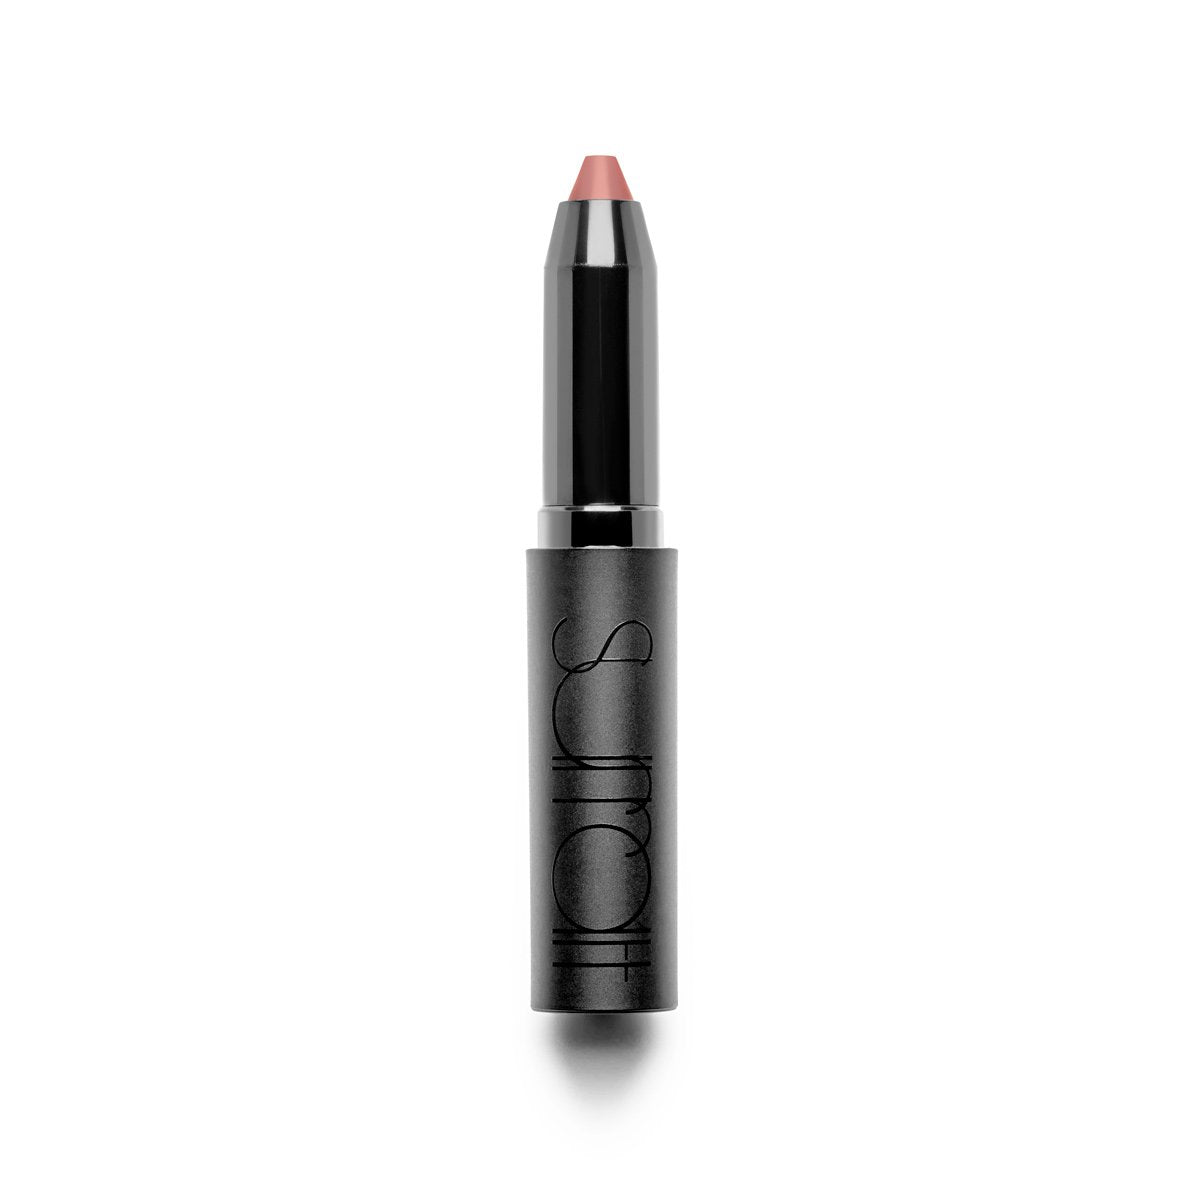 Les Nus - Automatique Lip Crayon in matte rosy taupe shade.